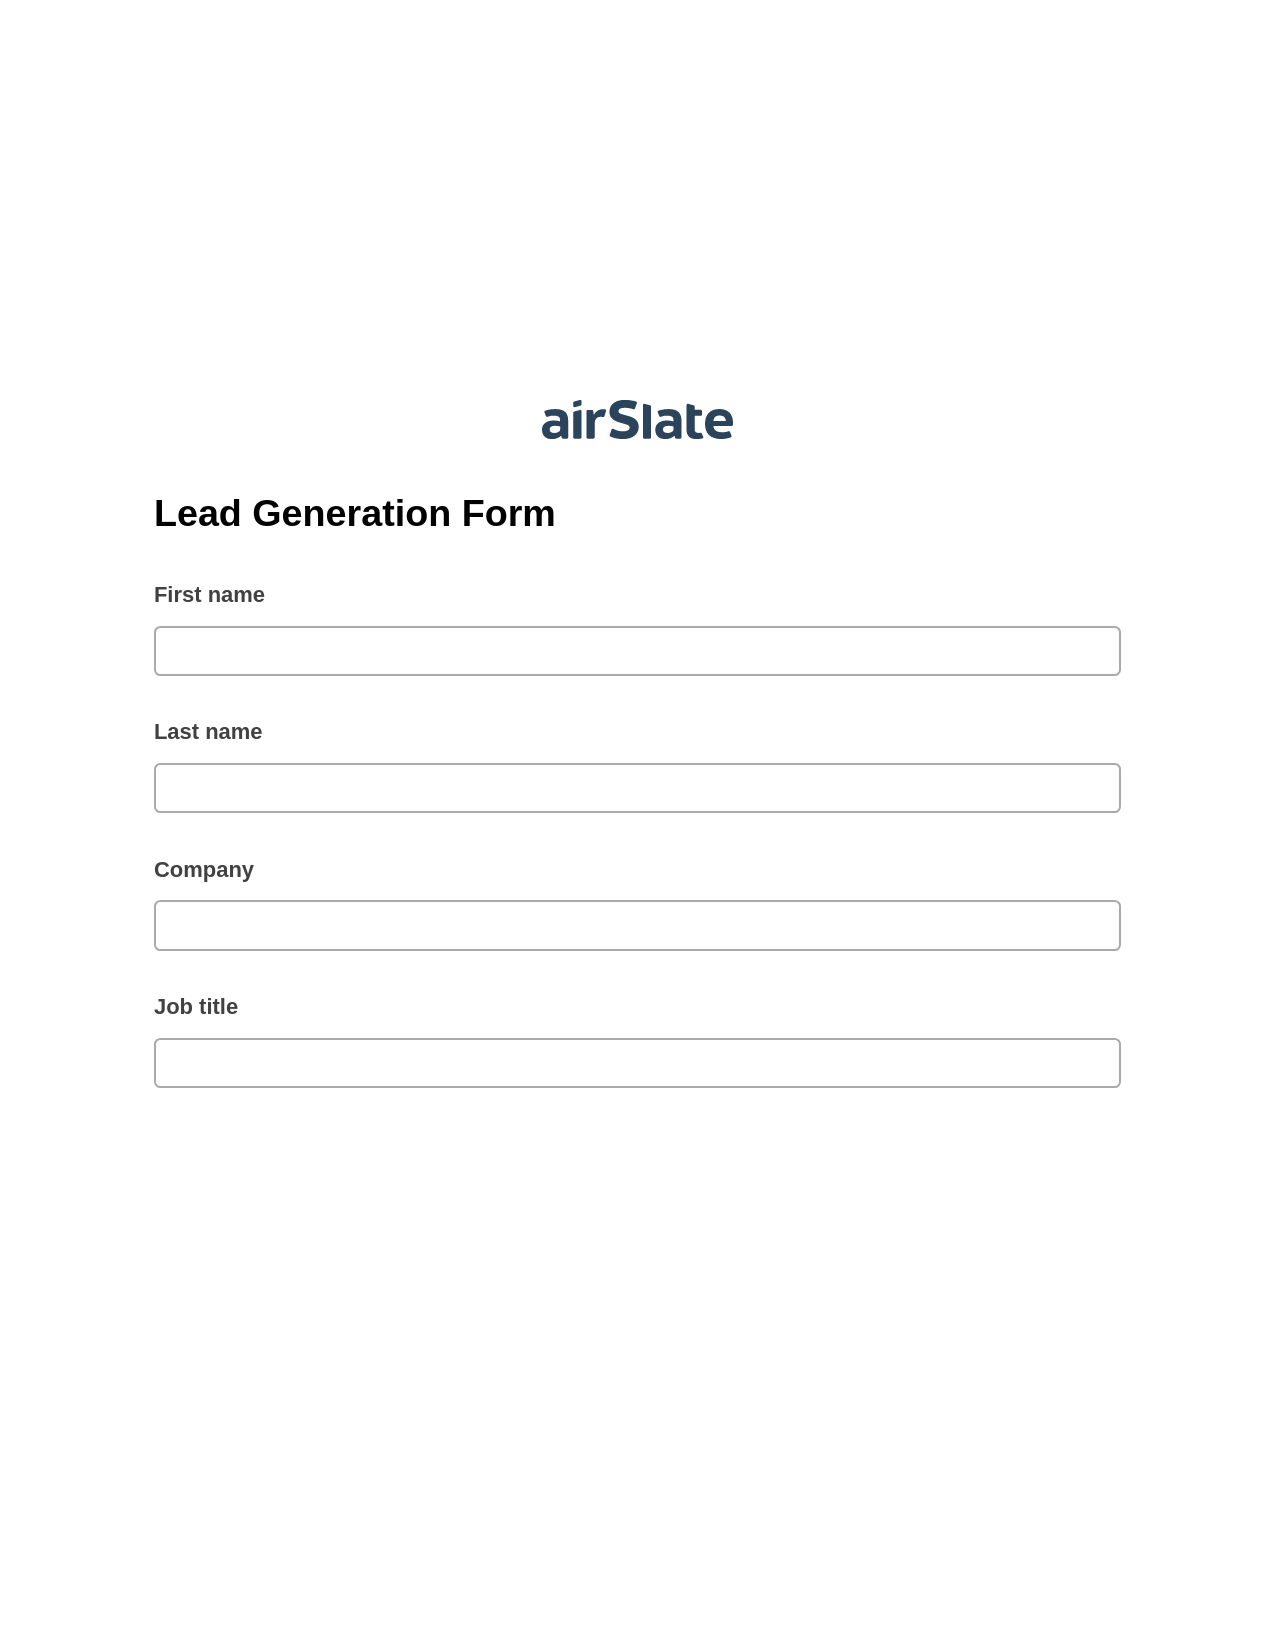 Lead Generation Form Pre-fill from Salesforce Records Bot, Slack Notification Bot, Text Message Notification Postfinish Bot